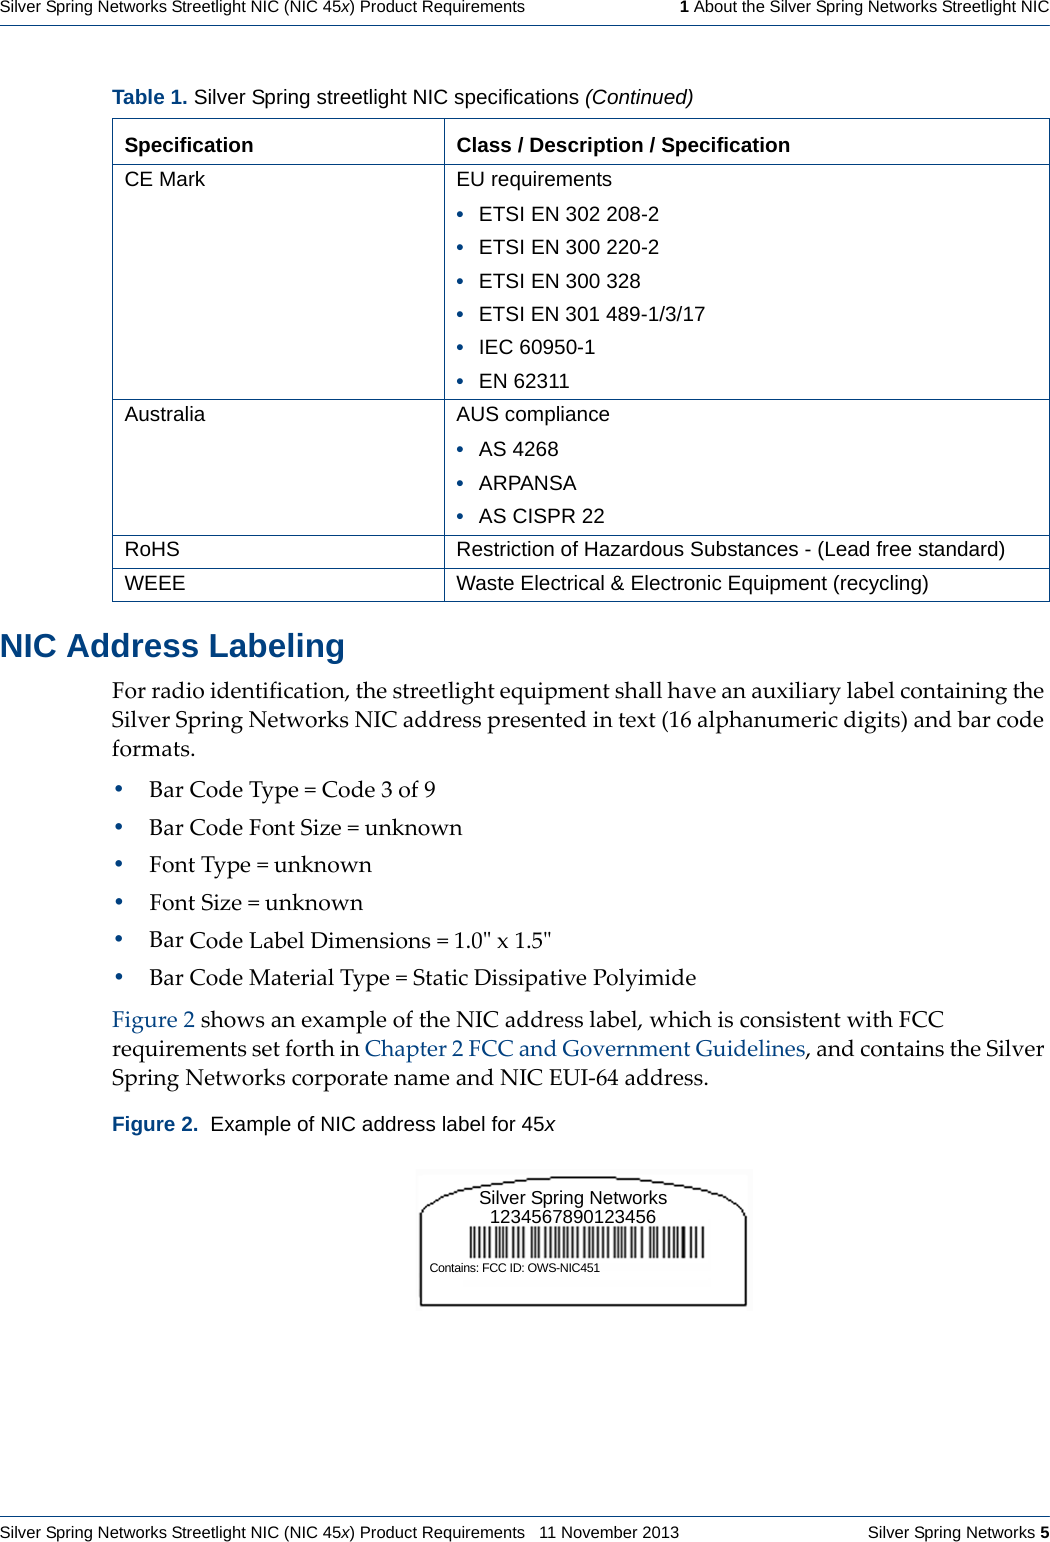 Silver Spring Networks Streetlight NIC (NIC 45x) Product Requirements   11 November 2013    Silver Spring Networks 5Silver Spring Networks Streetlight NIC (NIC 45x) Product Requirements   1 About the Silver Spring Networks Streetlight NICNIC Address LabelingForradioidentification,thestreetlightequipmentshallhaveanauxiliarylabelcontainingtheSilverSpringNetworksNICaddresspresentedintext(16alphanumericdigits)andbarcodeformats.•BarCodeType=Code3of9•BarCodeFontSize=unknown•FontType=unknown•FontSize=unknown•BarCodeLabelDimensions=1.0ʺx1.5ʺ•BarCodeMaterialType=StaticDissipativePolyimideFigure2showsanexampleoftheNICaddresslabel,whichisconsistentwithFCCrequirementssetforthinChapter2FCCandGovernmentGuidelines,andcontainstheSilverSpringNetworkscorporatenameandNICEUI‐64address.CE Mark EU requirements•ETSI EN 302 208-2•ETSI EN 300 220-2•ETSI EN 300 328•ETSI EN 301 489-1/3/17•IEC 60950-1•EN 62311Australia AUS compliance•AS 4268•ARPANSA•AS CISPR 22RoHS  Restriction of Hazardous Substances - (Lead free standard)WEEE Waste Electrical &amp; Electronic Equipment (recycling)Figure 2.  Example of NIC address label for 45xTable 1. Silver Spring streetlight NIC specifications (Continued)Specification Class / Description / SpecificationSilver Spring Networks1234567890123456Contains: FCC ID: OWS-NIC451 